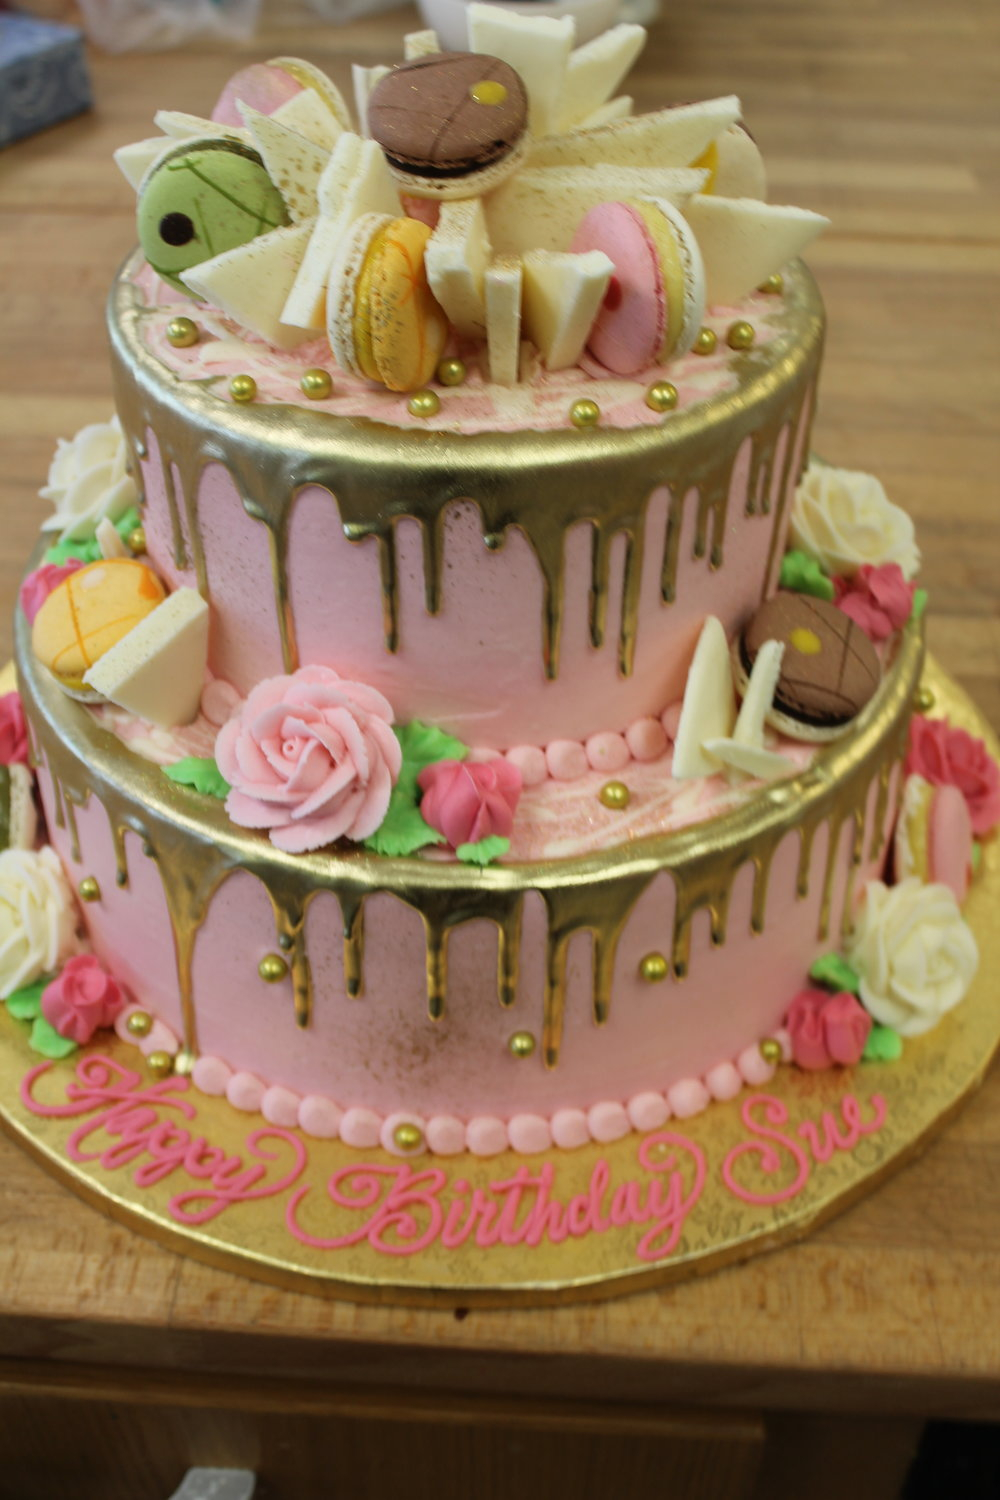 Specialty Birthday Cakes Specialty Birthday Cakes Delaware County Pa Sophisticakes